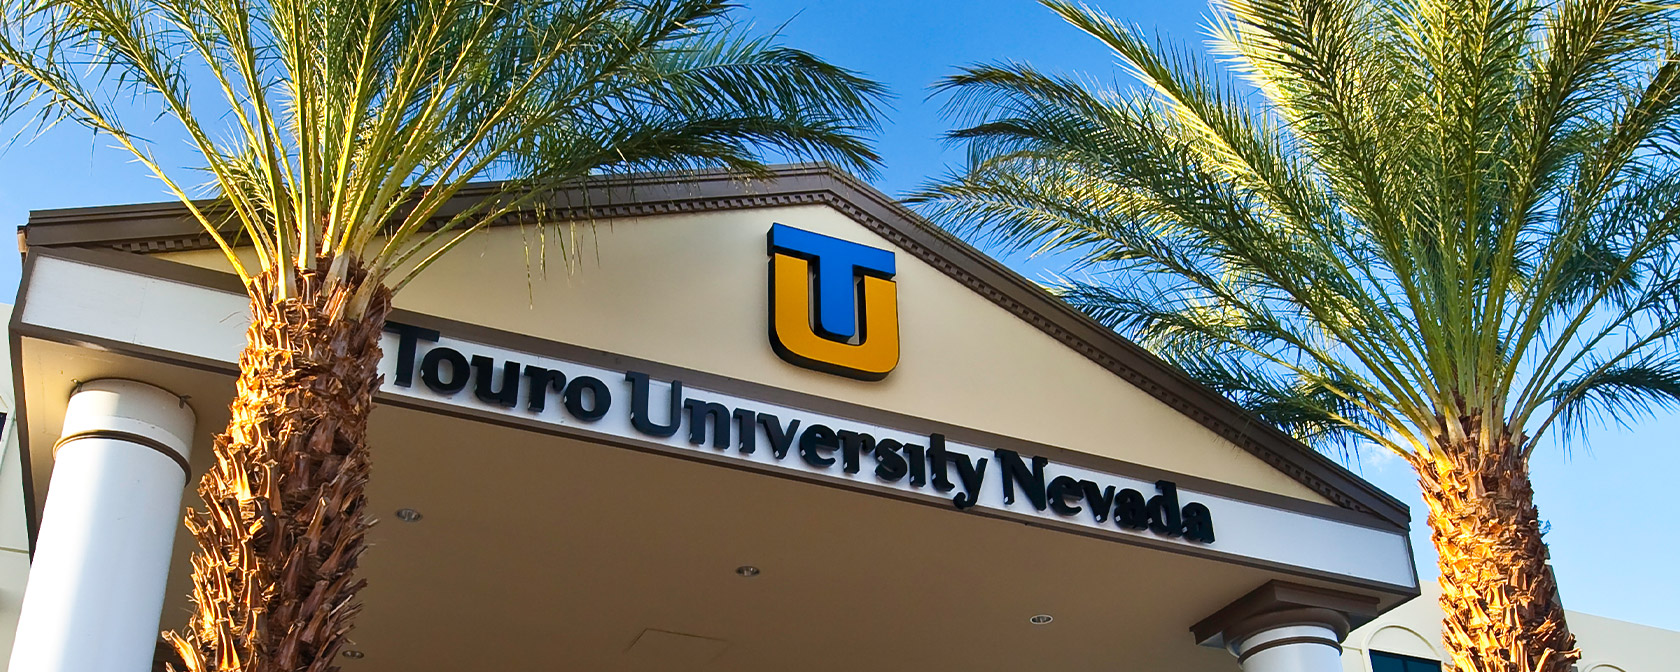 Touro University Nevada’s annual Research Day was held virtually this year, shown here: Touro University Nevada’s Building Exterior